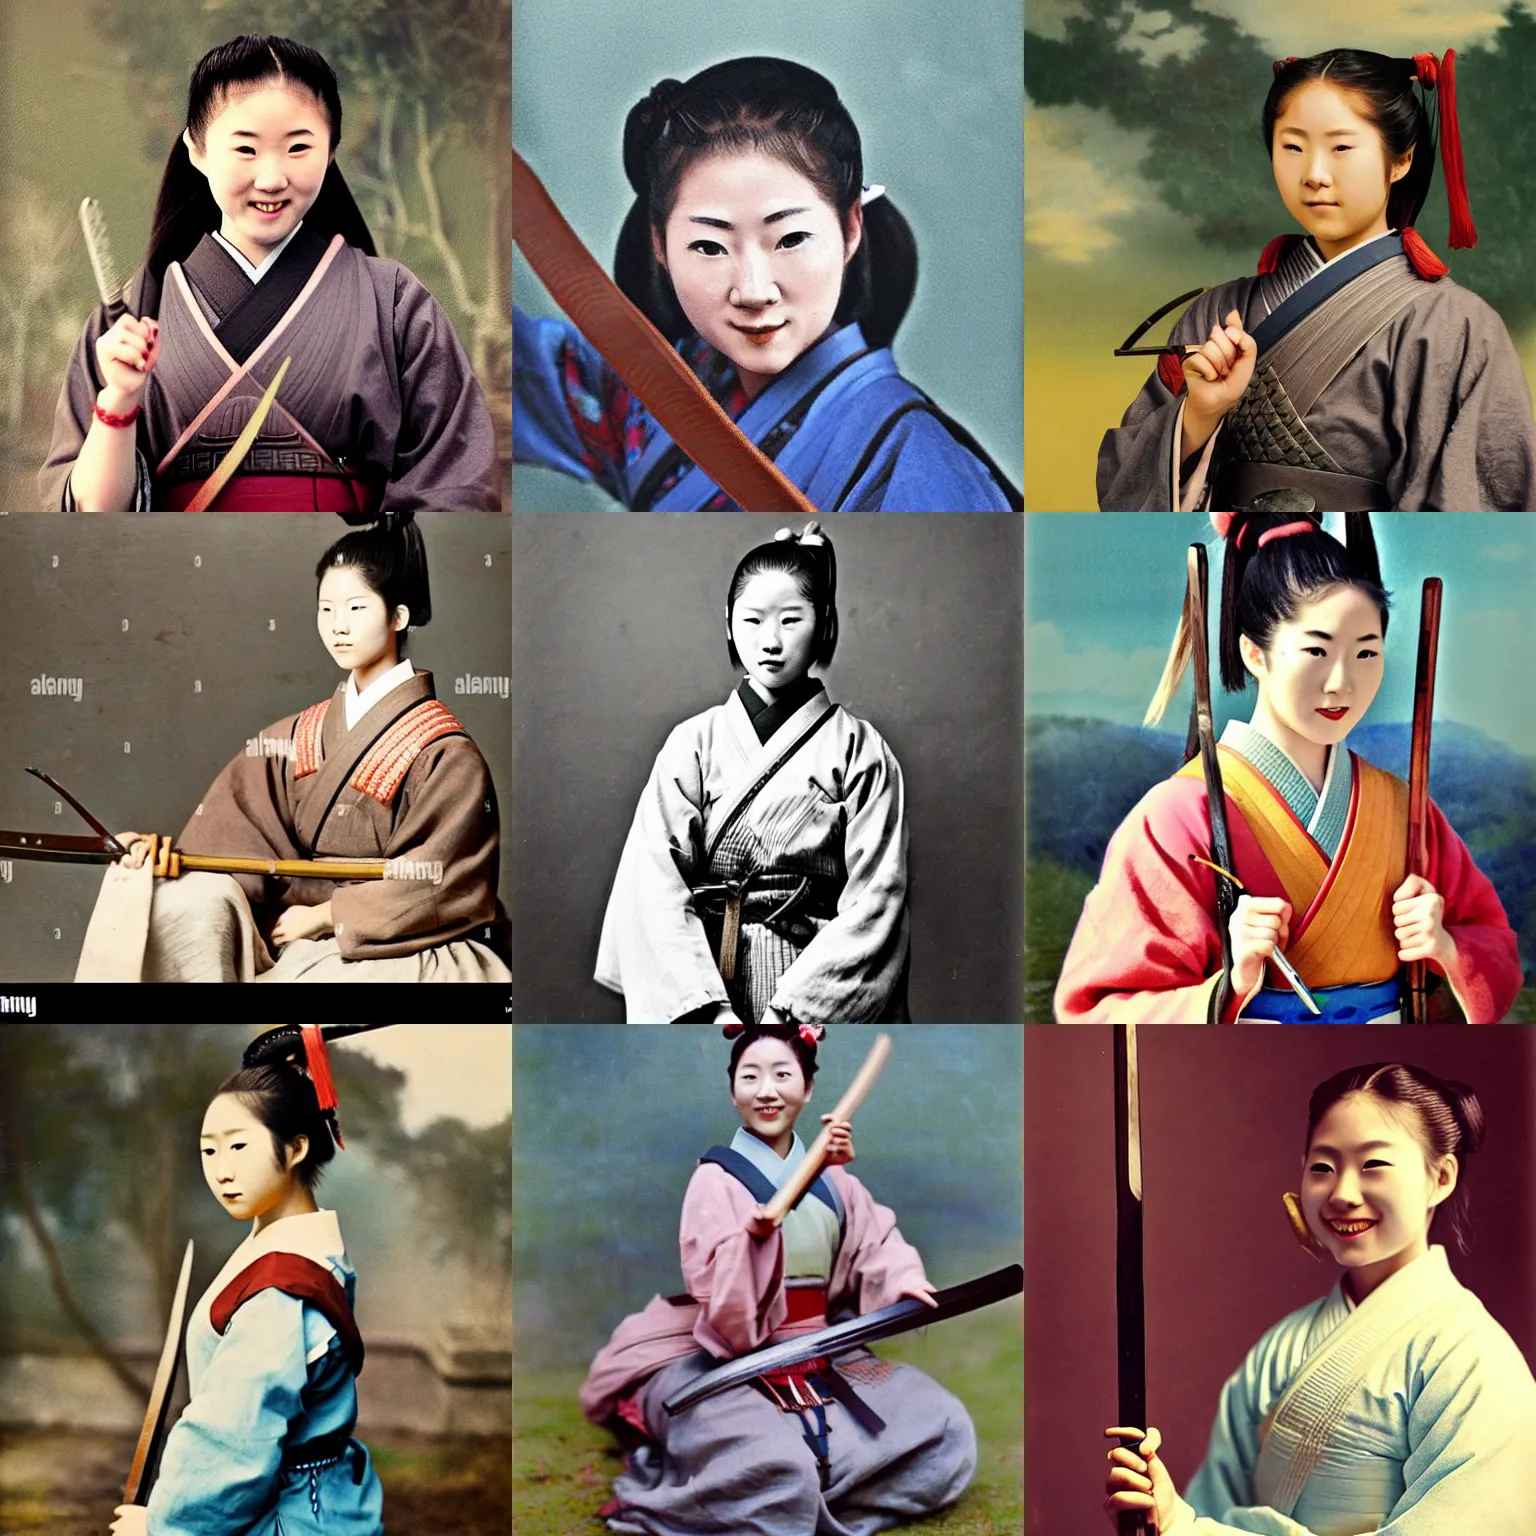 Prompt: Young woman samurai, pigtails, holding a sword, painted nails, smiling, historical photo